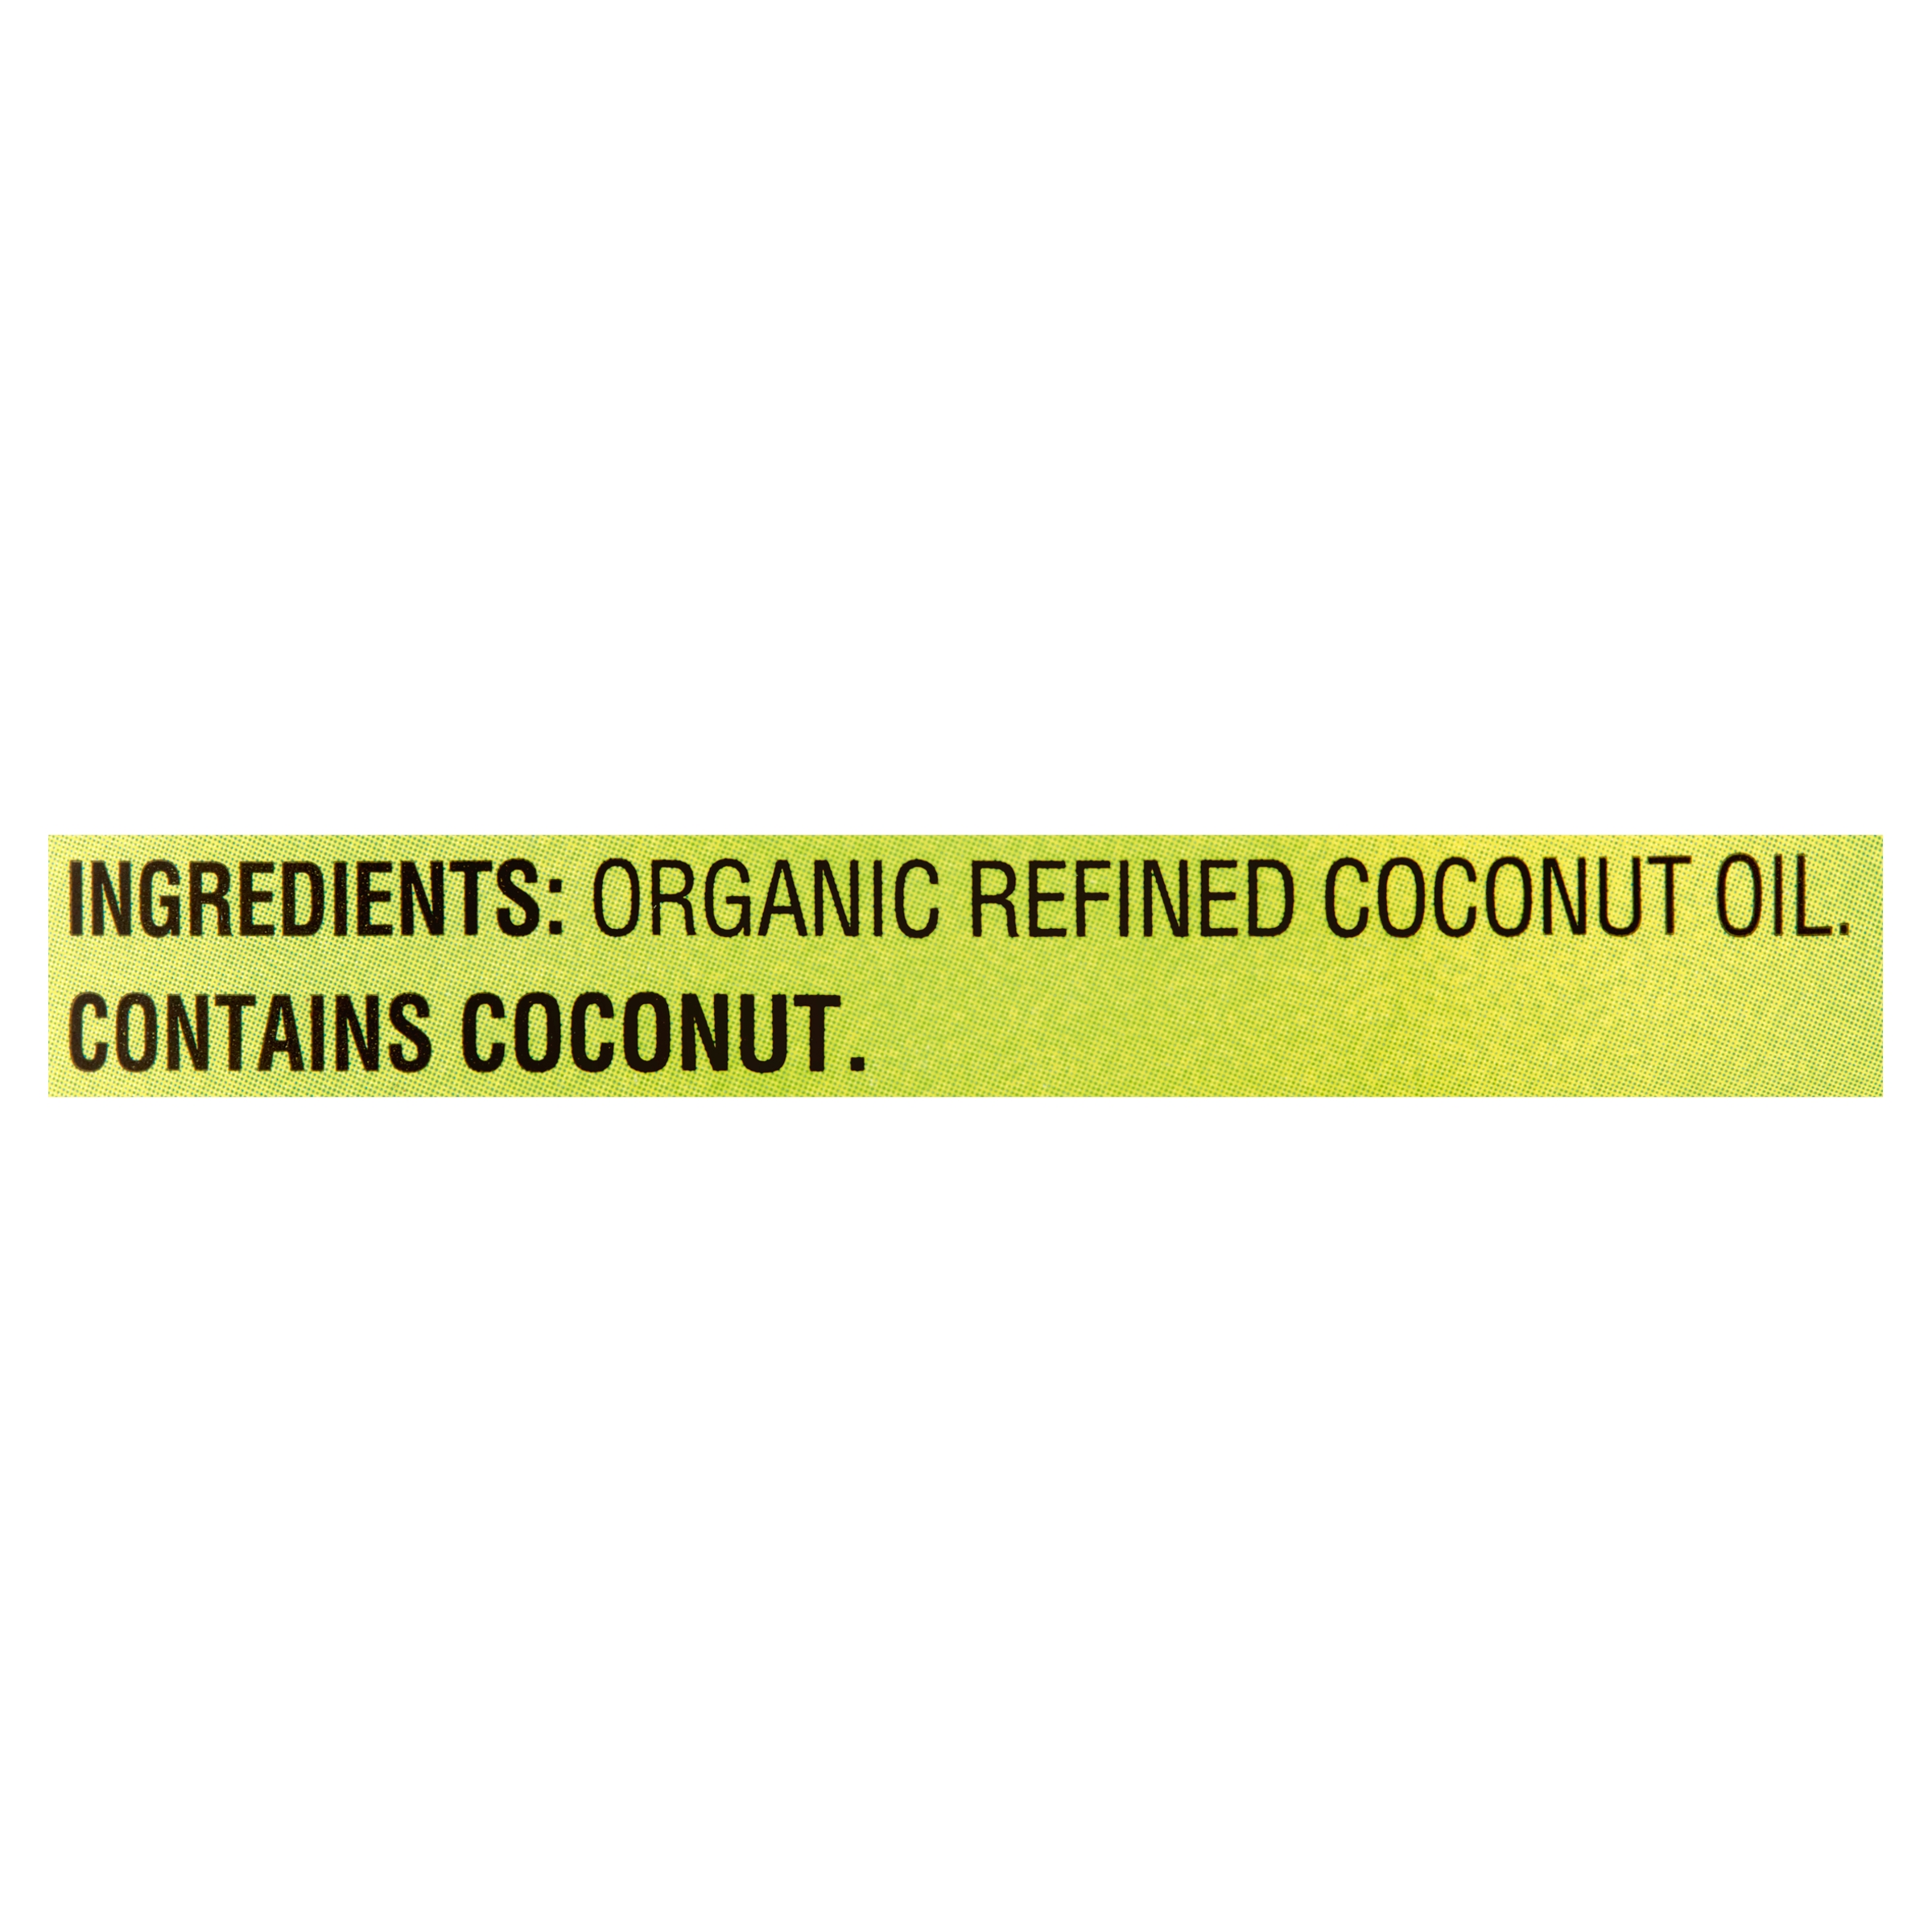 Great Value Organic Naturally Refined Coconut Oil, 56 fl oz - image 4 of 7